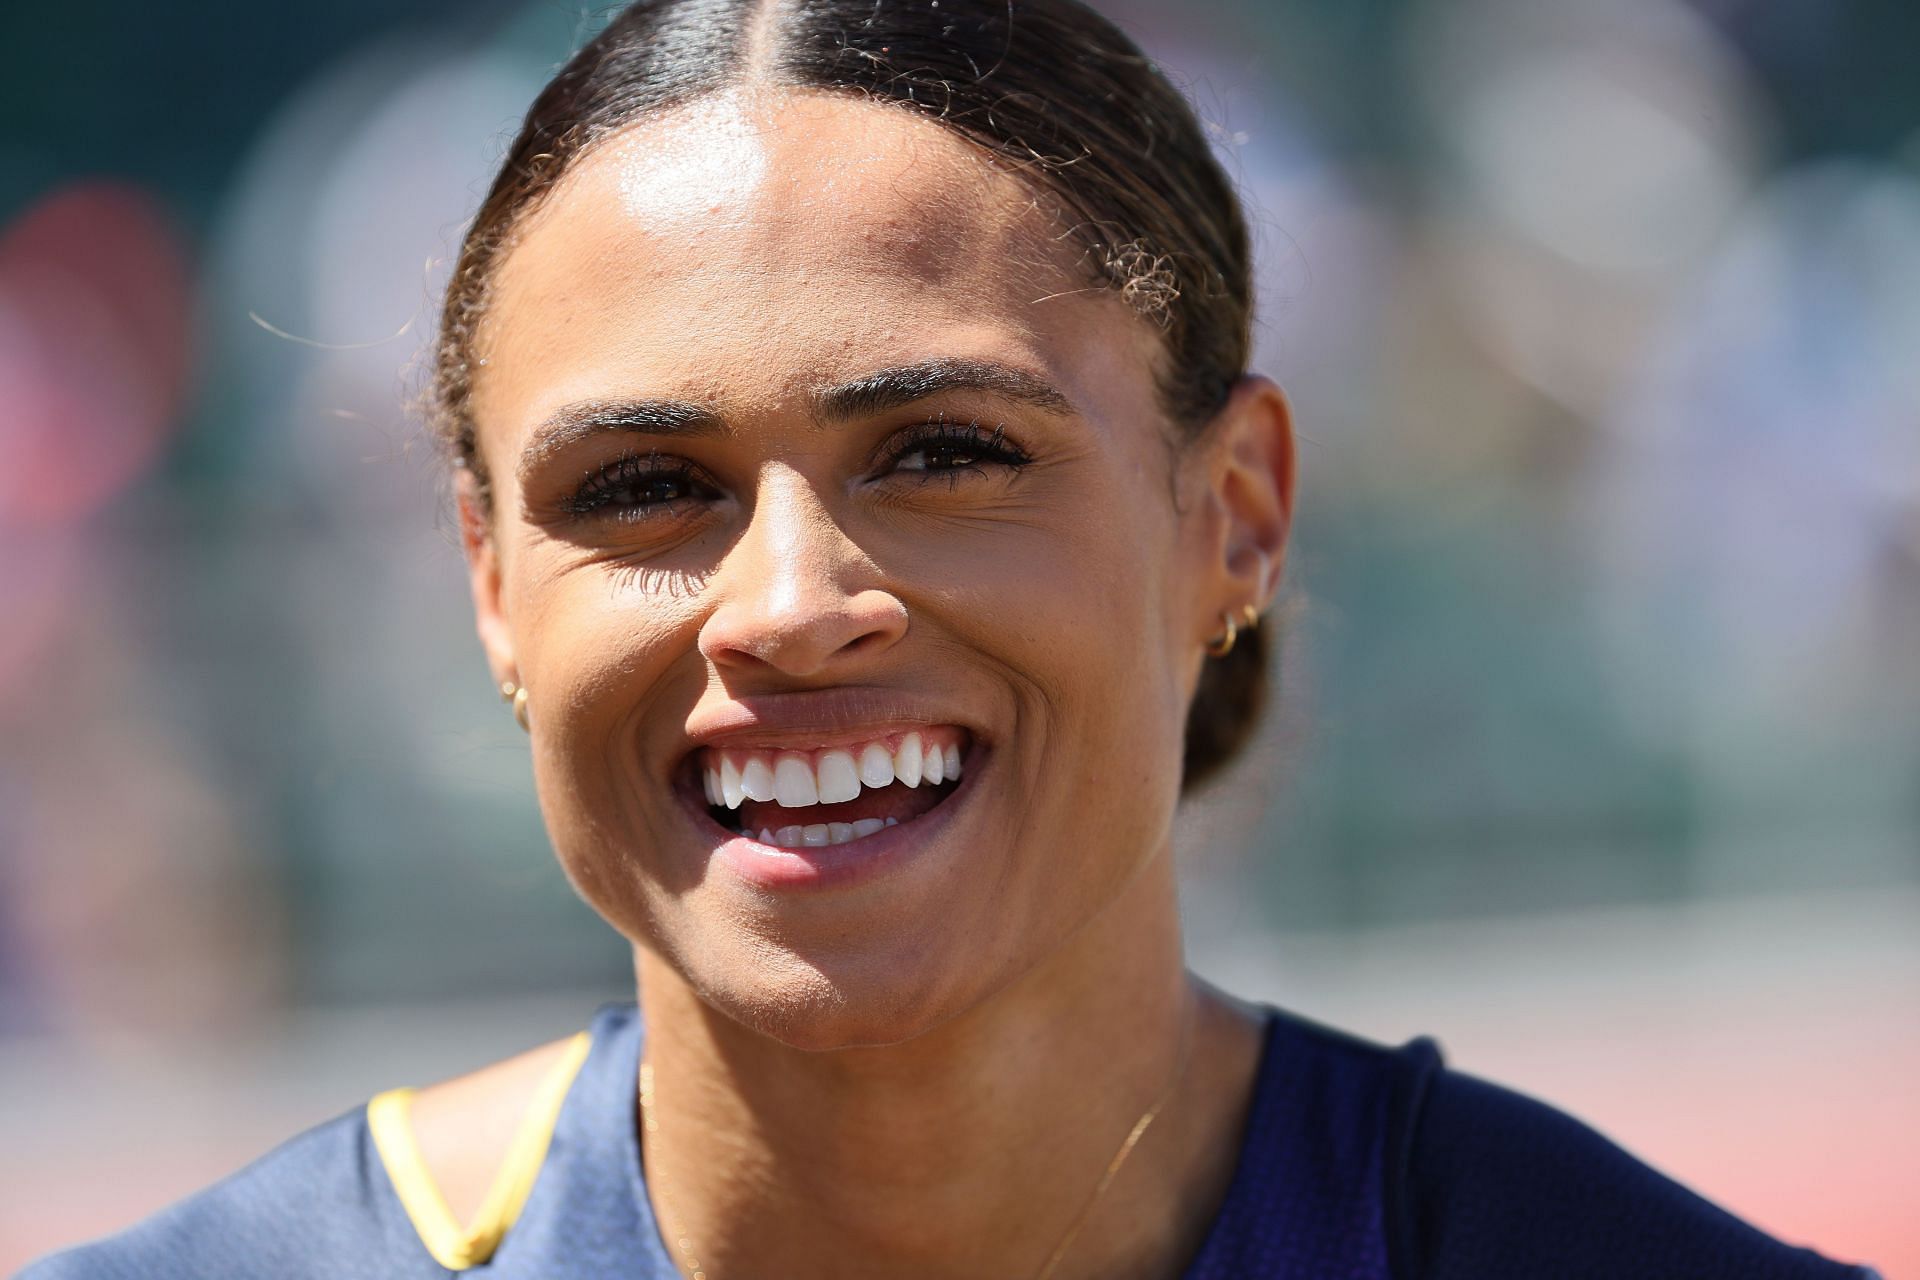 Sydney McLaughlin sets a world record in the final of the Women 400 Meter Hurdles during the 2022 USATF Outdoor Championships at Hayward Field on June 25, 2022 in Eugene, Oregon. (Photo by Andy Lyons/Getty Images)